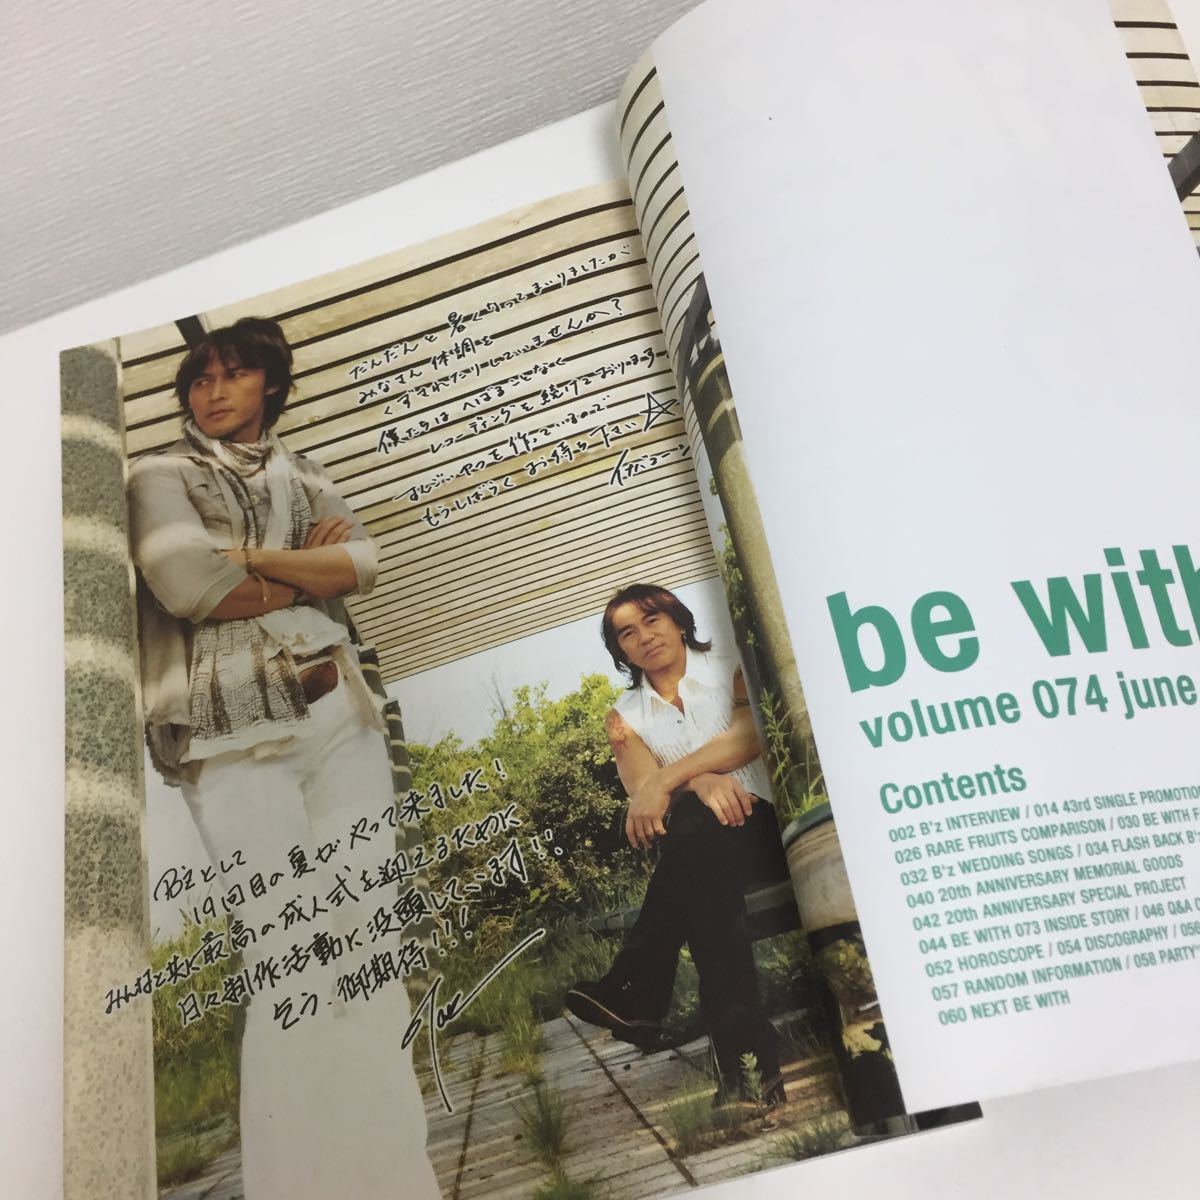 B'z ビーズ be with volume 74 december 2007 B'z official fan club special issue_画像6